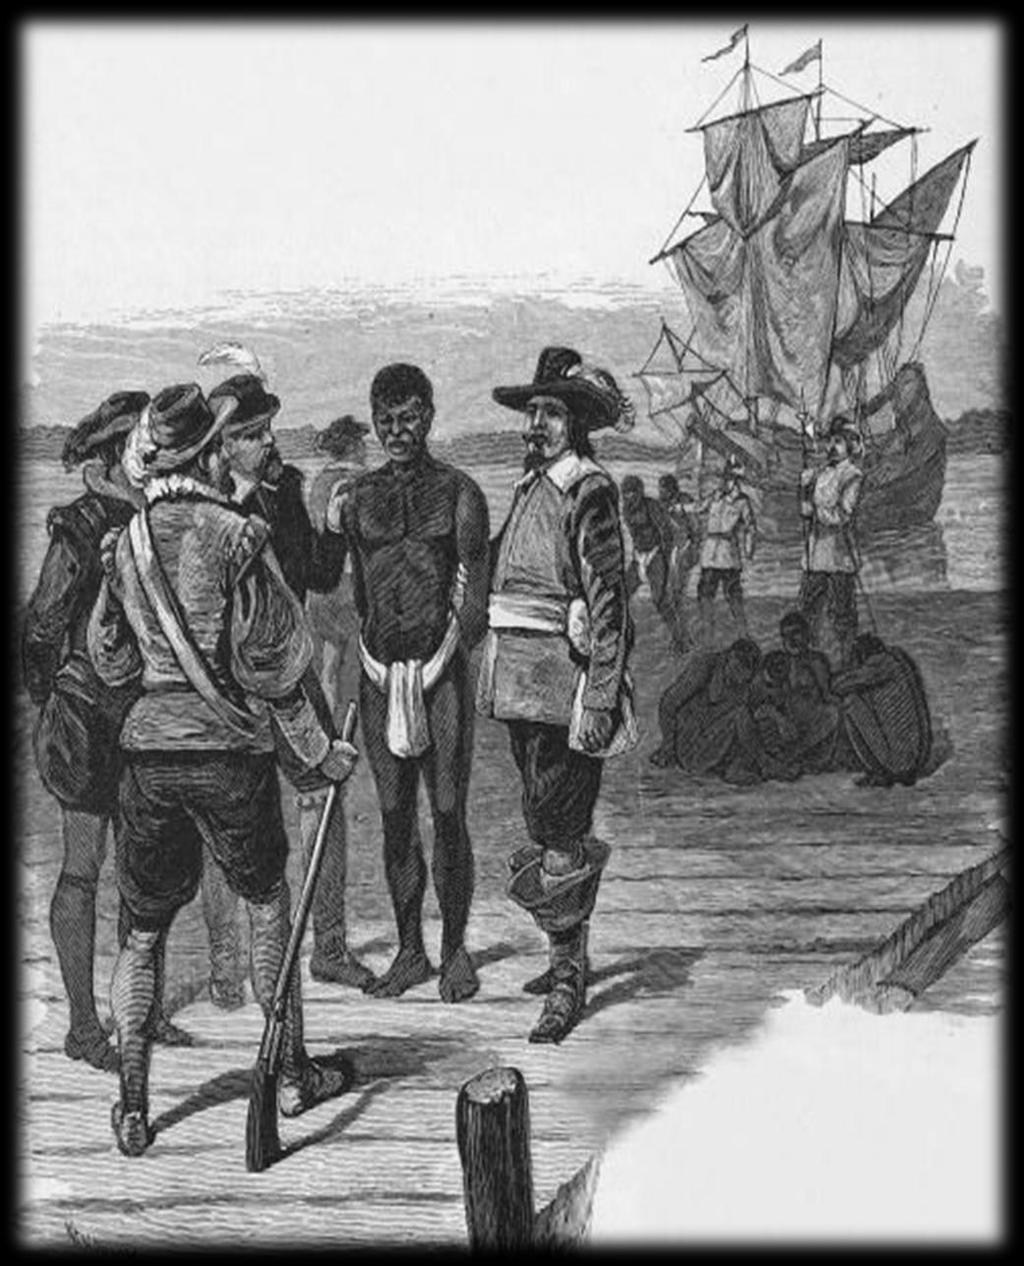 Birth of American Slavery The Dutch brought the first black labor to the colony as servants, to be freed after serving time as laborers.